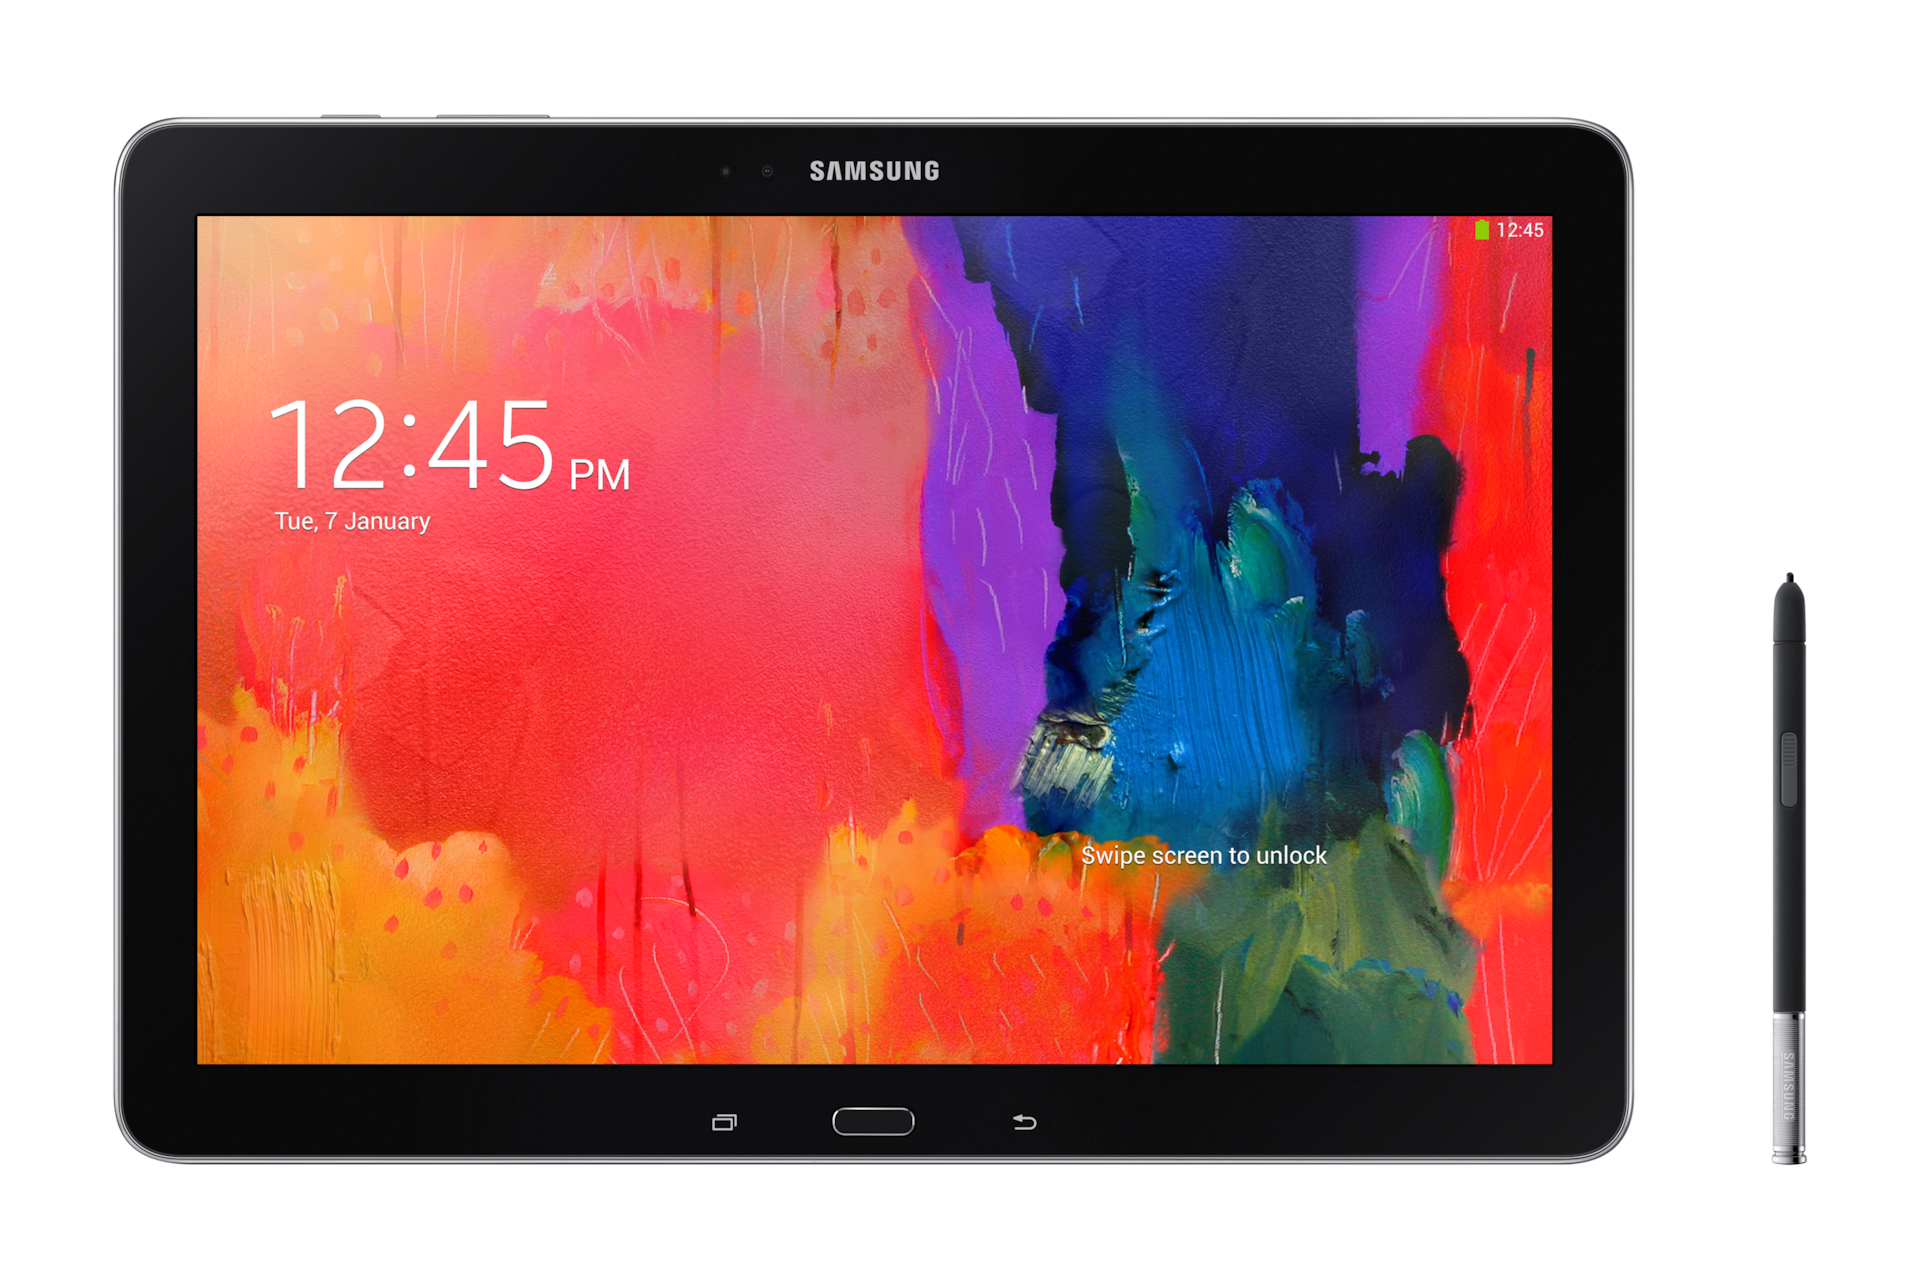 How to Root Galaxy Note Pro 12.2 (All Variants) on Android 4.4.2 KitKat Firmware